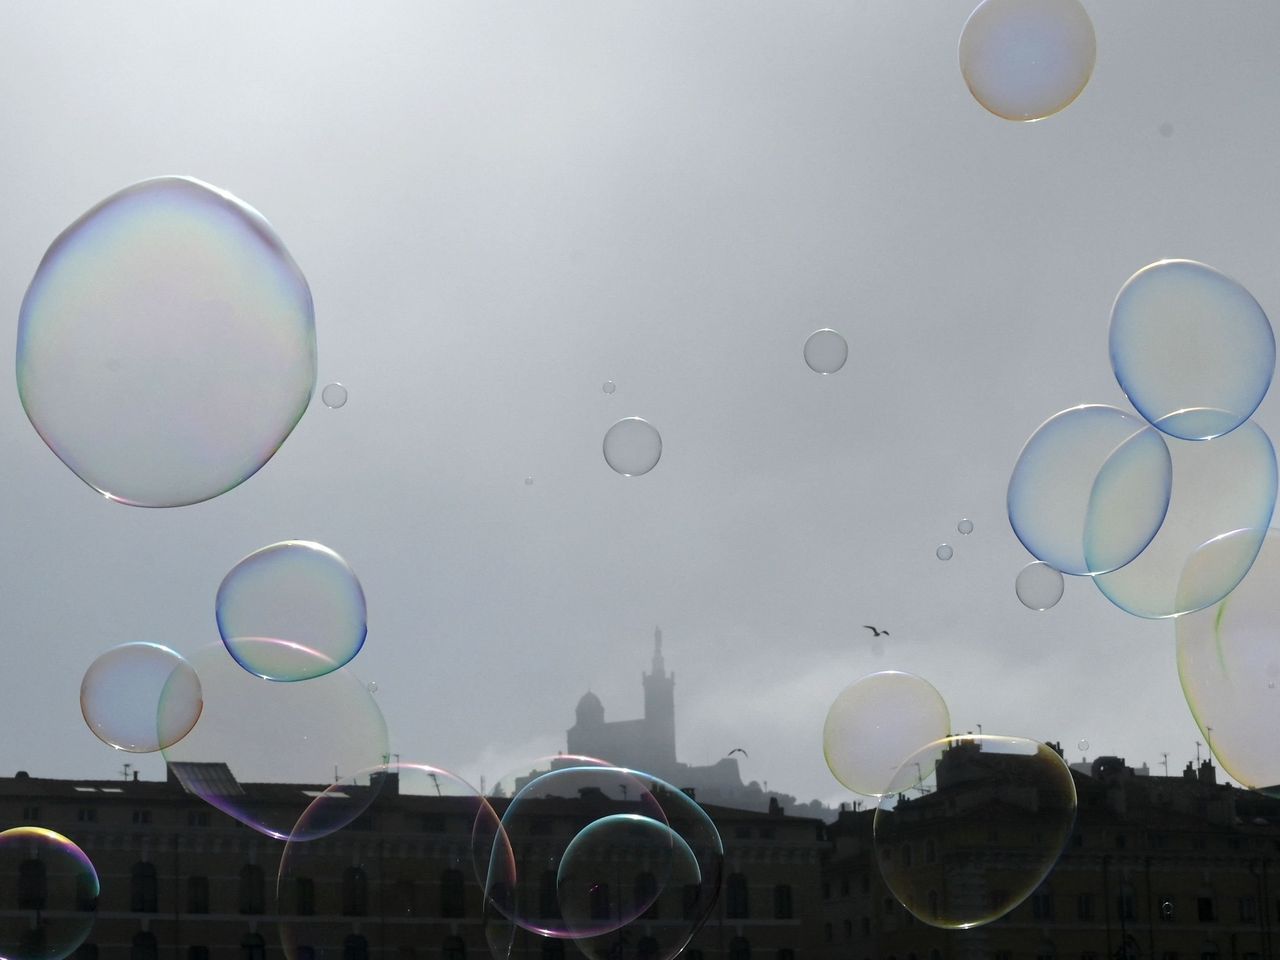 Bubbles floating in the air with a building in the background - Bubbles